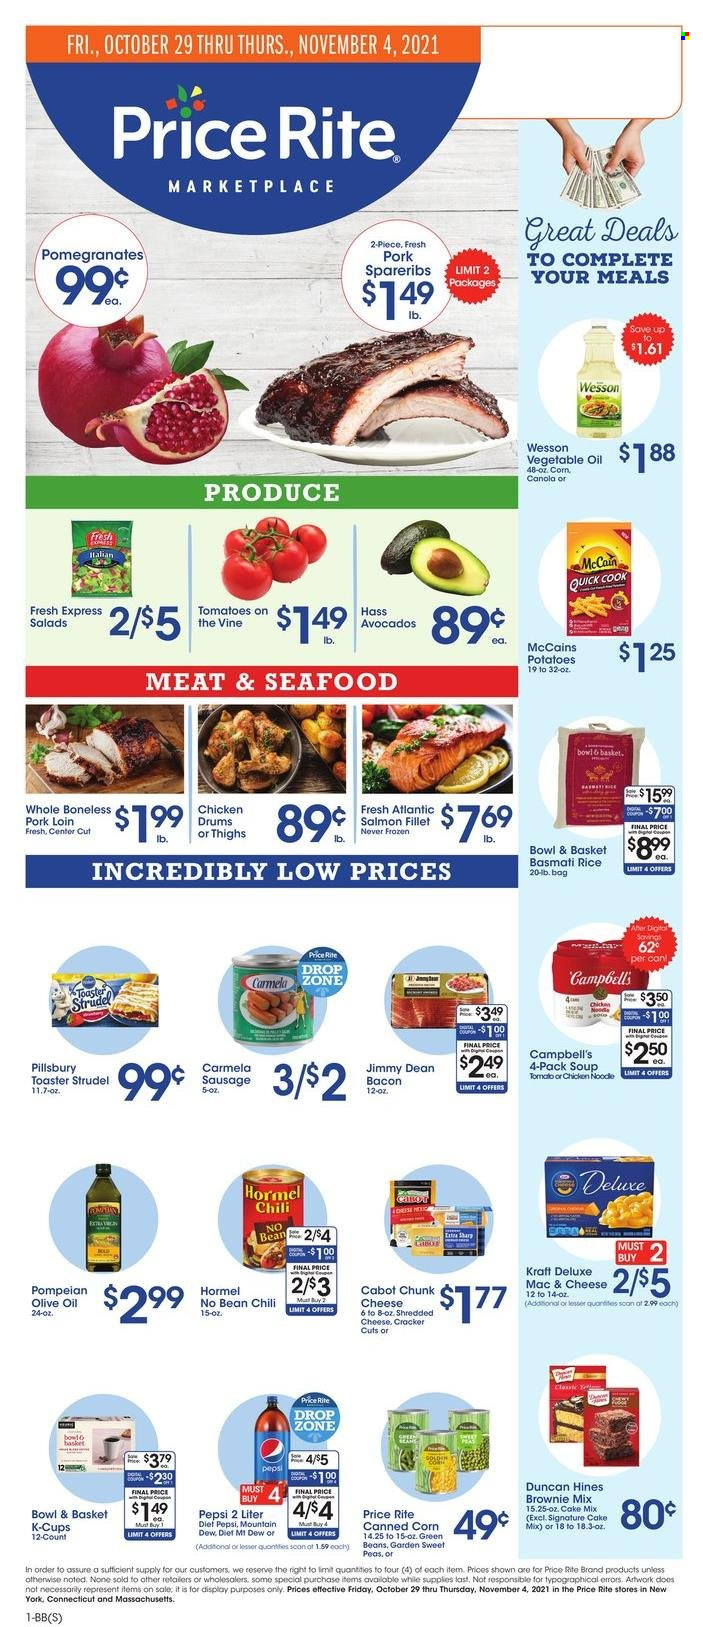 thumbnail - Price Rite Flyer - 10/29/2021 - 11/04/2021 - Sales products - strudel, Bowl & Basket, brownie mix, cake mix, corn, green beans, tomatoes, potatoes, peas, avocado, salmon, salmon fillet, seafood, Campbell's, soup, Pillsbury, noodles, Kraft®, Jimmy Dean, Hormel, bacon, sausage, shredded cheese, McCain, crackers, Carmela, basmati rice, rice, vegetable oil, olive oil, oil, Pepsi, coffee capsules, K-Cups, pork loin, pork meat, pork spare ribs, pomegranate. Page 1.